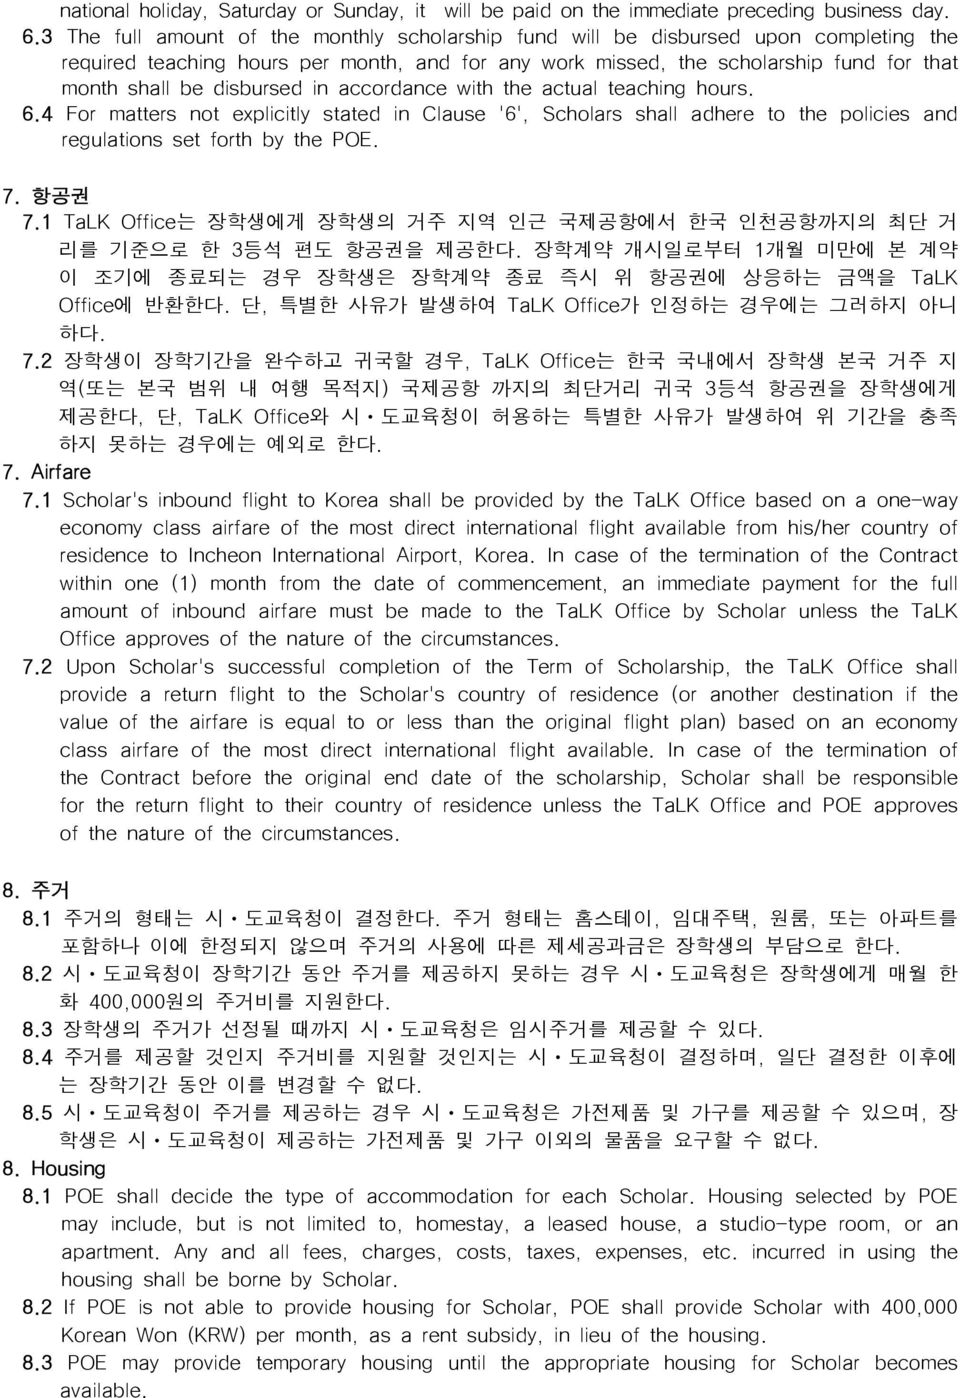 disbursed in accordance with the actual teaching hours. 6.4 For matters not explicitly stated in Clause '6', Scholars shall adhere to the policies and regulations set forth by the POE. 7. 항공권 7.